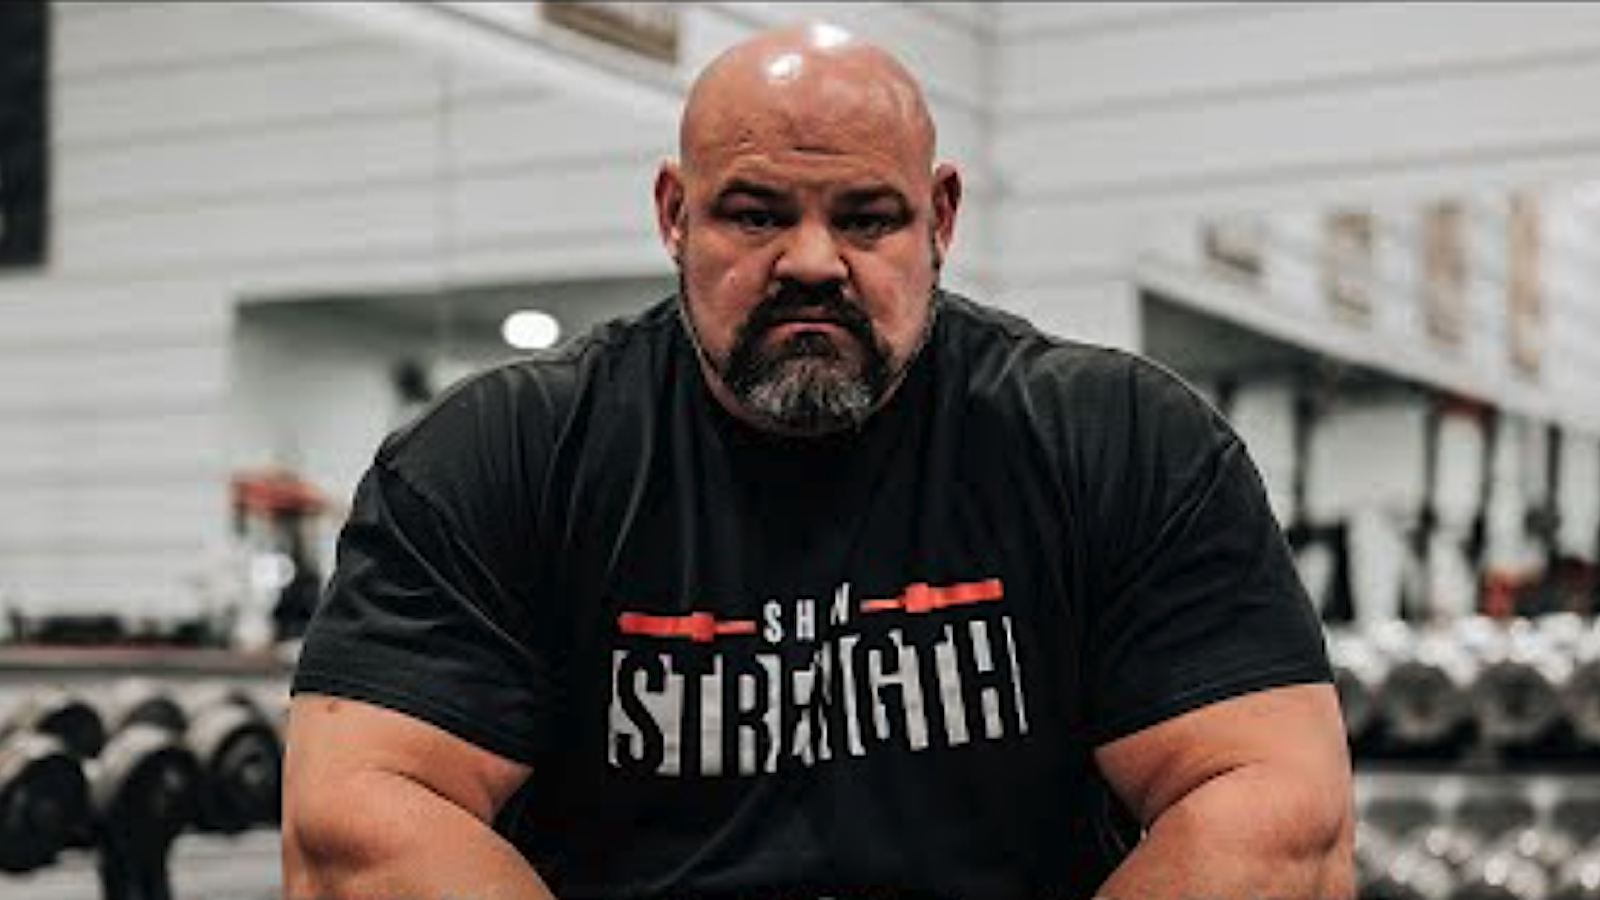 Mitchell Hooper Wins World's Strongest Man 2023 as Shaw Retires